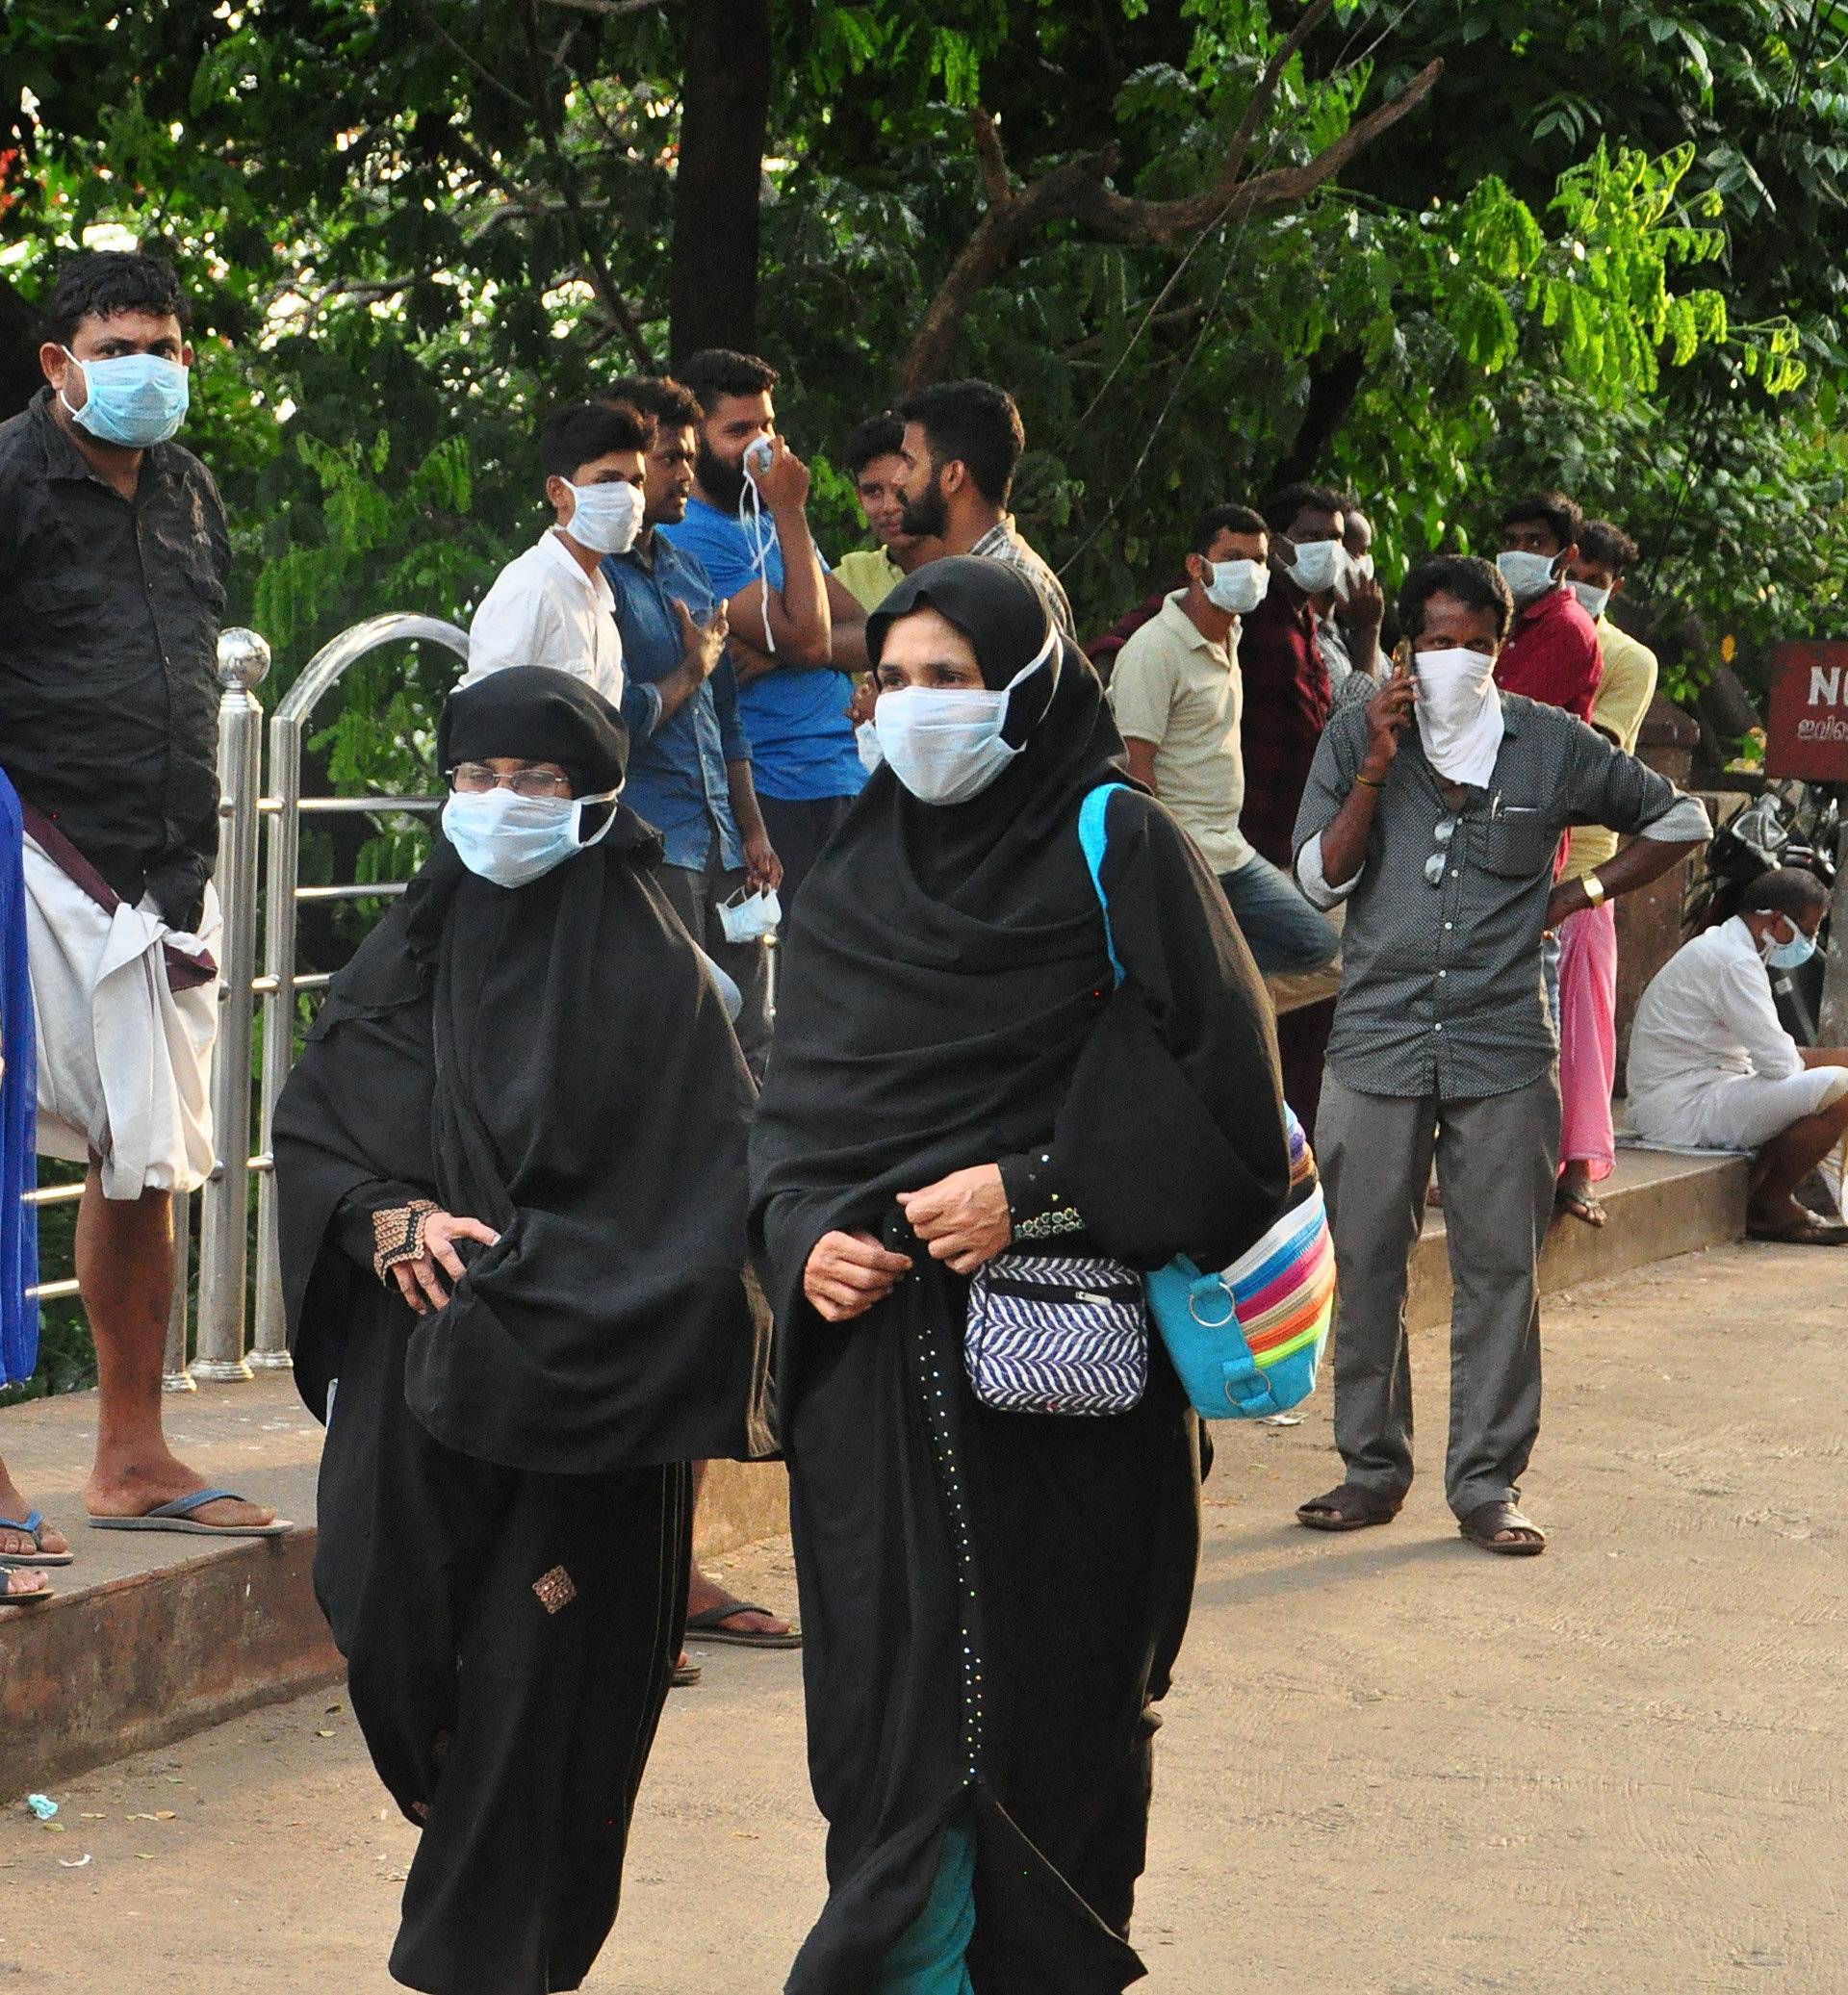 People wearing masks are seen at a hospital in Kozhikode